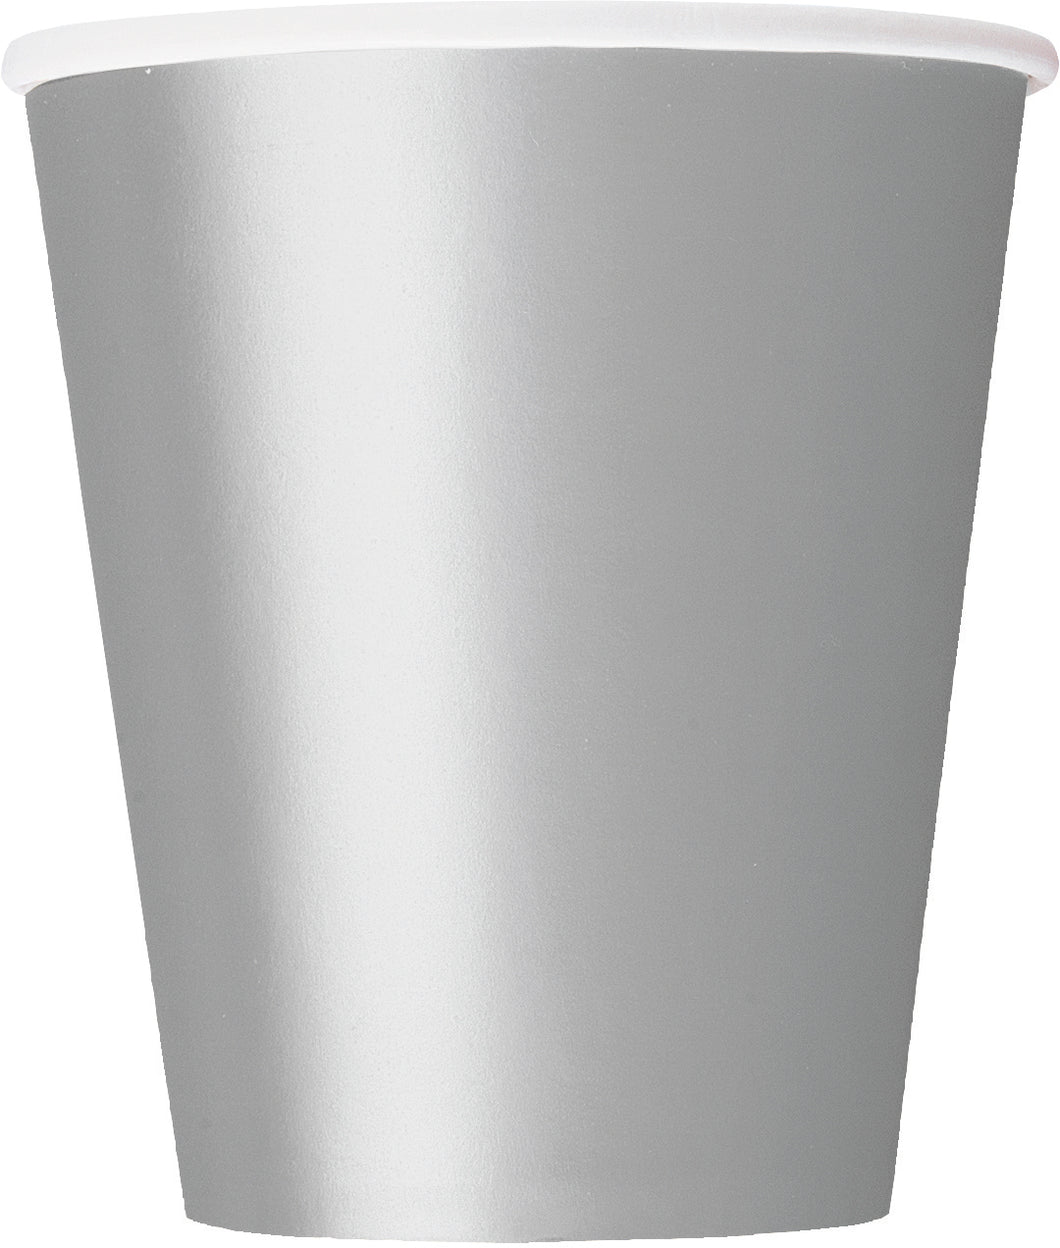 SILVER 8 x 9oz PAPER CUPS Supplier: Meteor Party